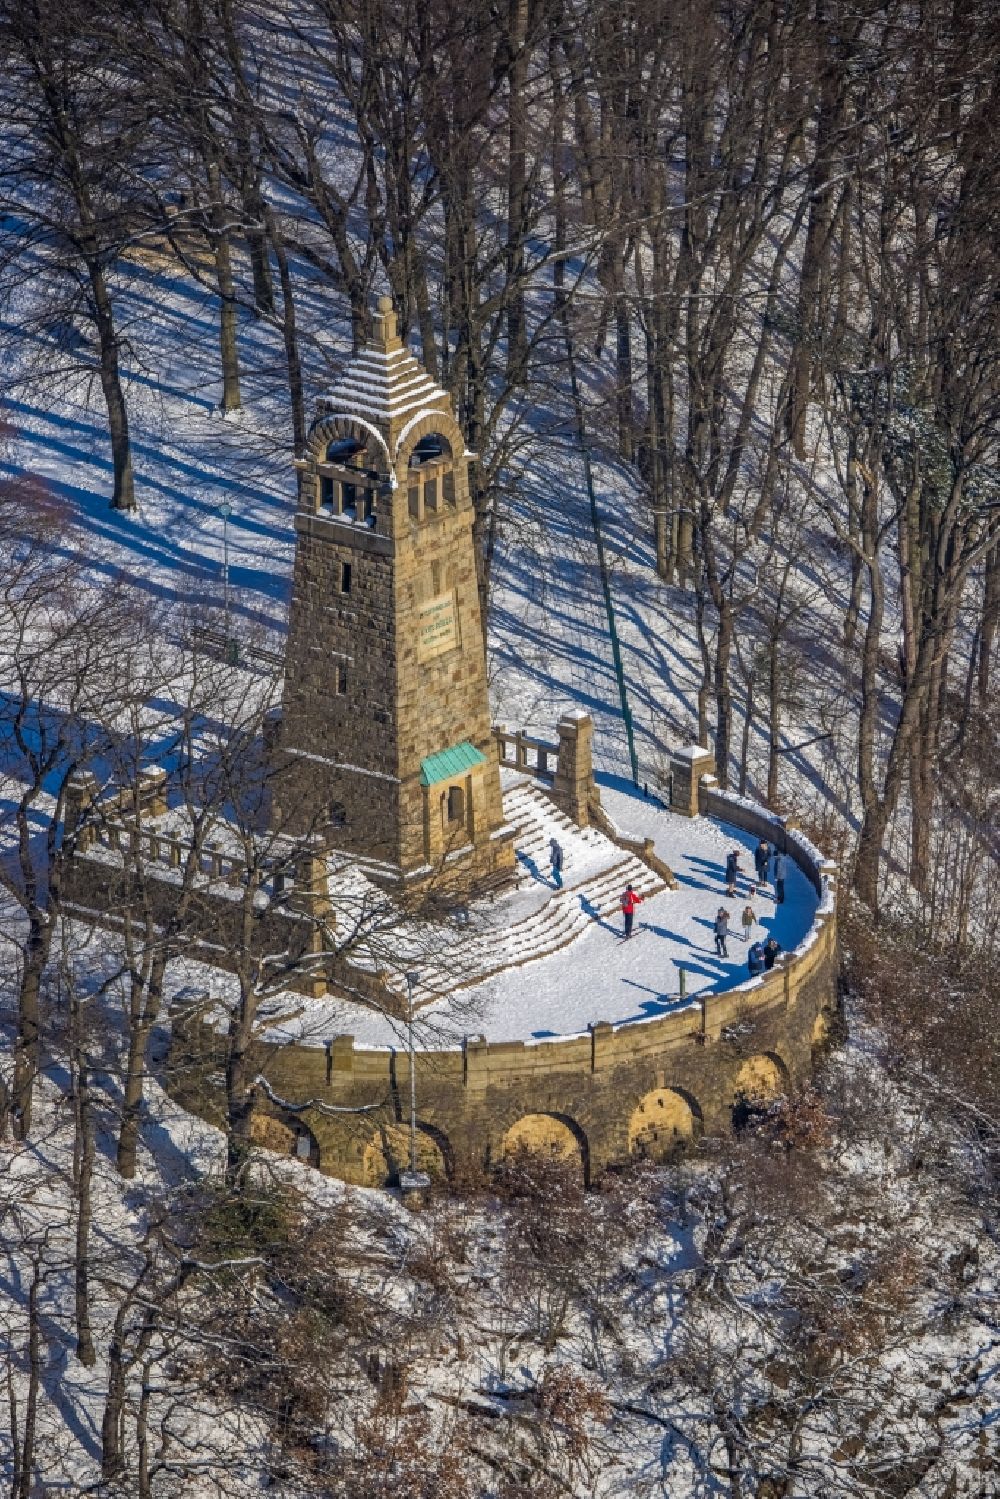 Witten from the bird's eye view: Wintry snowy structure of the observation tower Berger - Denkmal in Witten in the state North Rhine-Westphalia, Germany